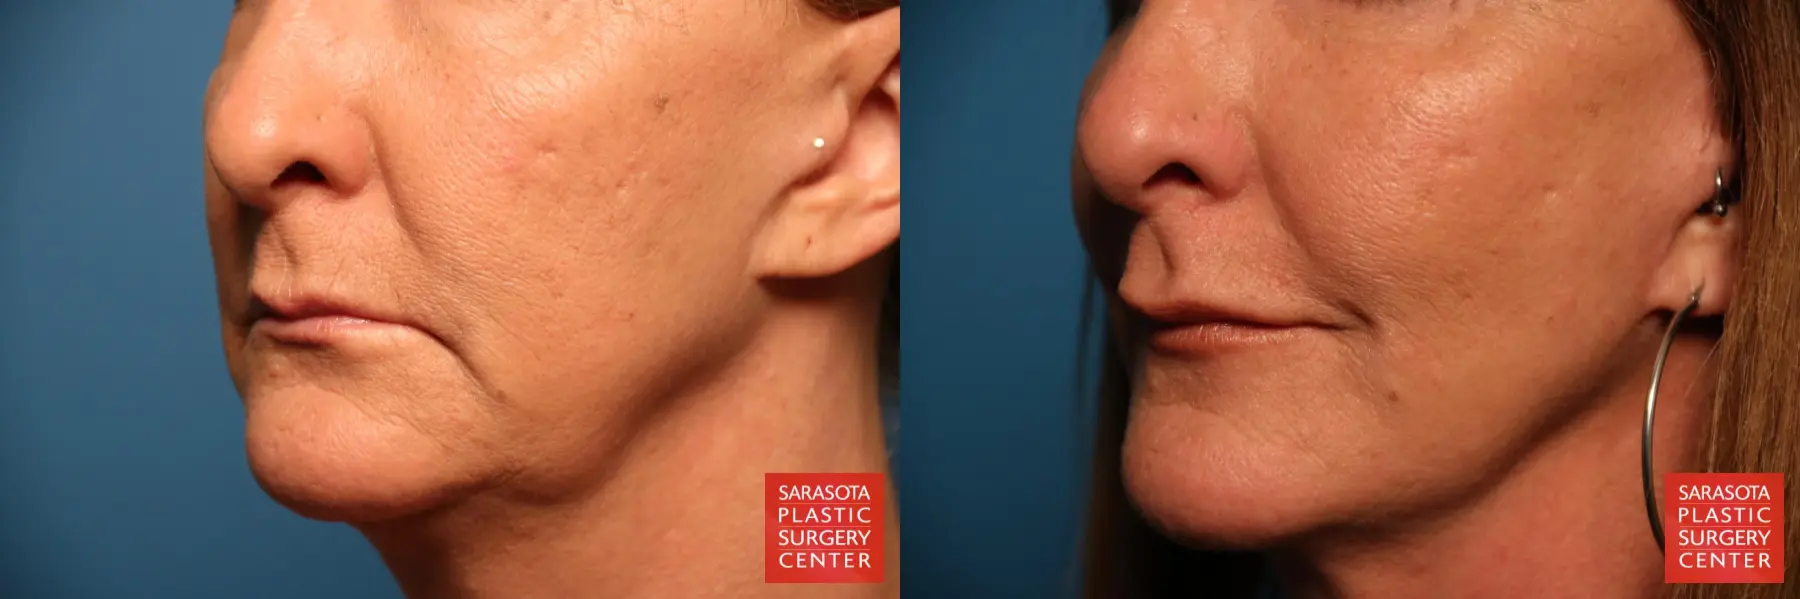 Fillers: Patient 1 - Before and After 2